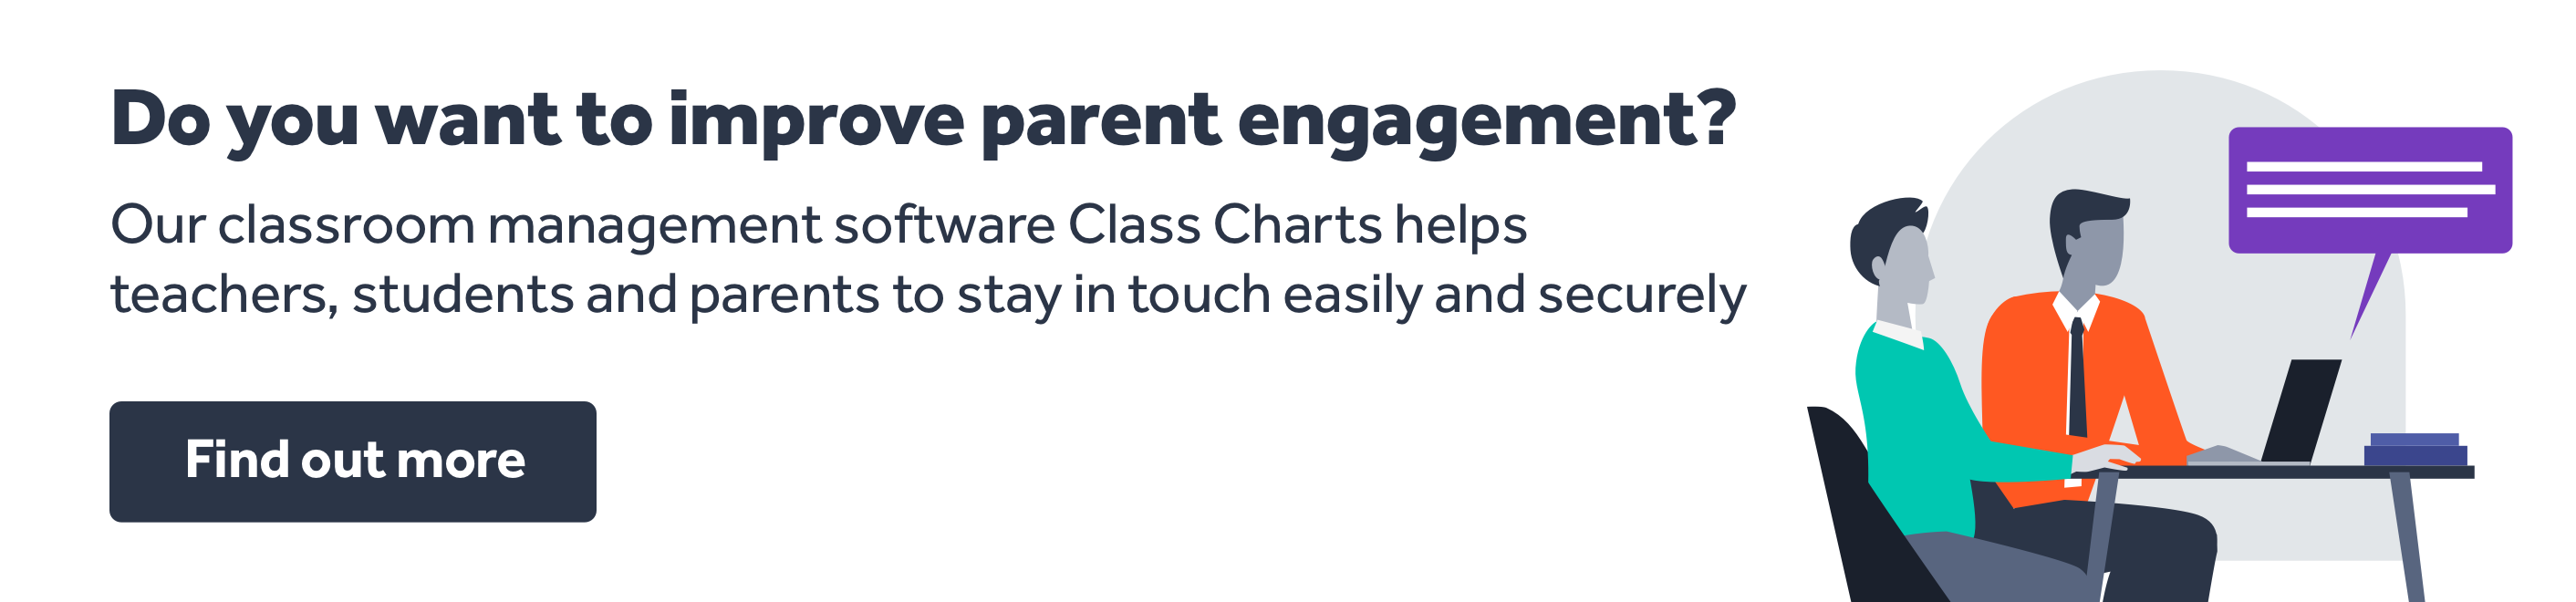 Class charts in blog banner